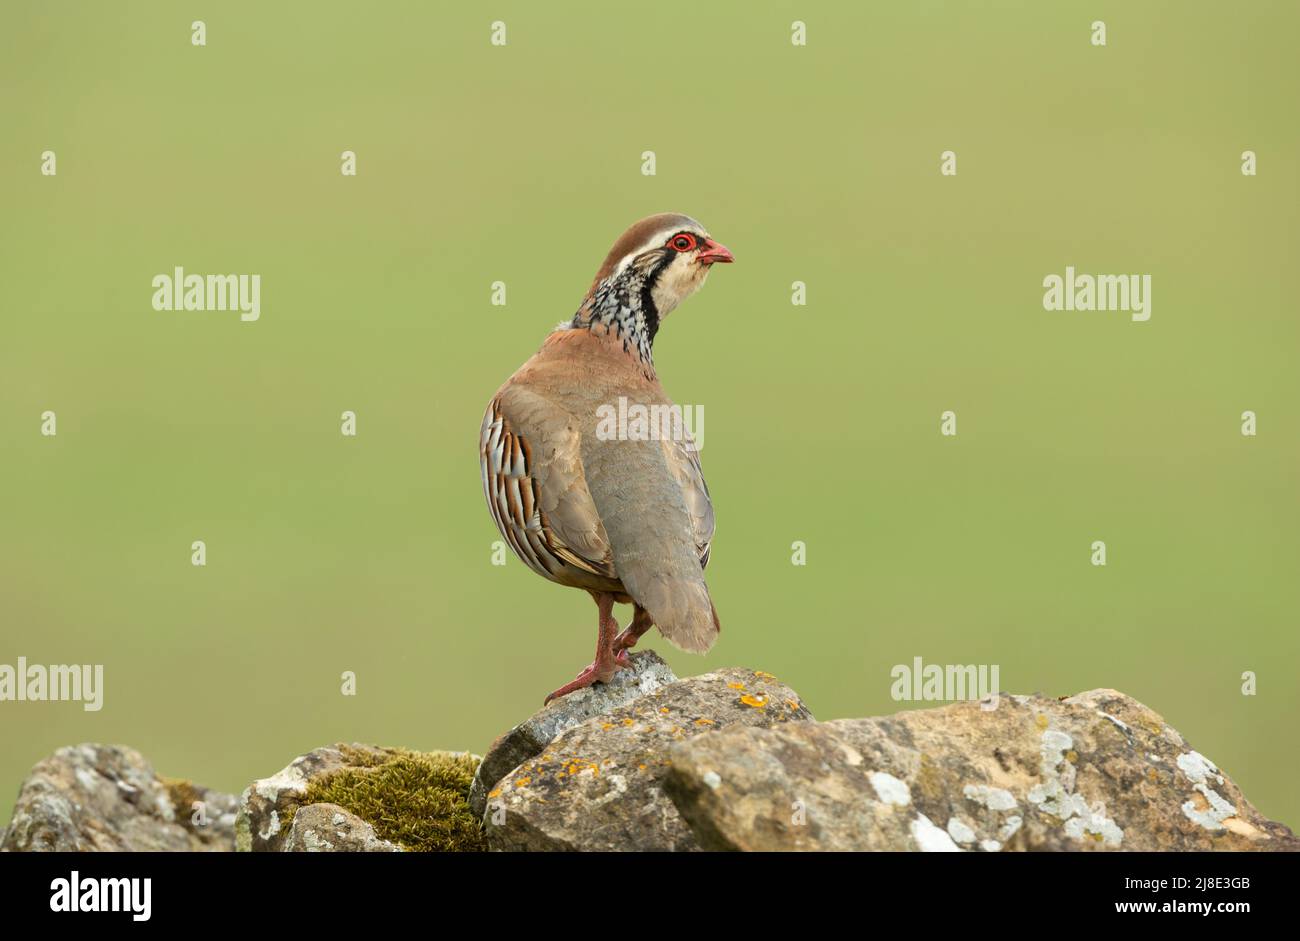 Close up of a  Red-legged or French partridge stood on a lichen covered drystone wall and looking backgwards.  Clean, green background with space for Stock Photo